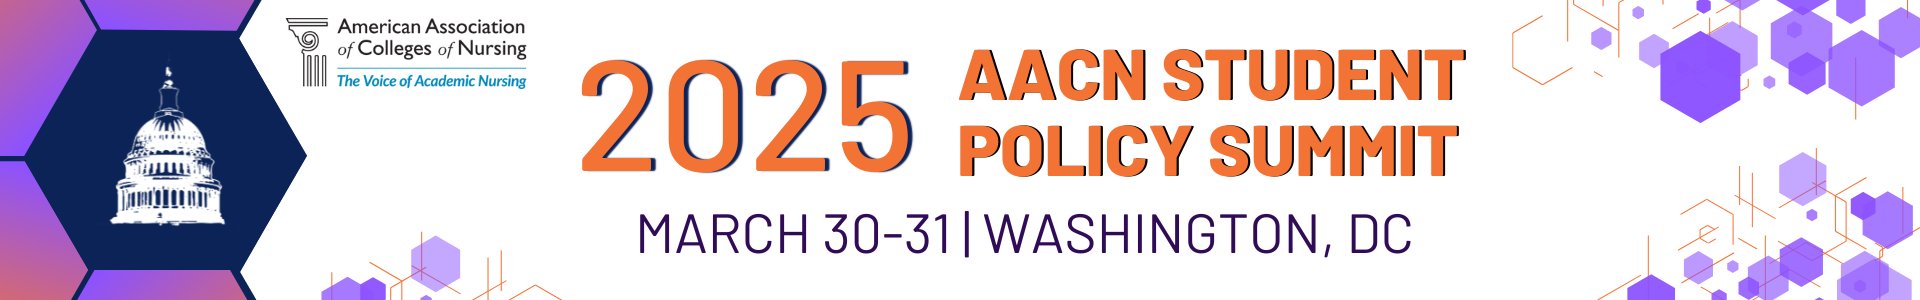 American association of colleges of nursing | 2025 AACN Student Policy Summit | March 24-25, 2025 | Washington, DC